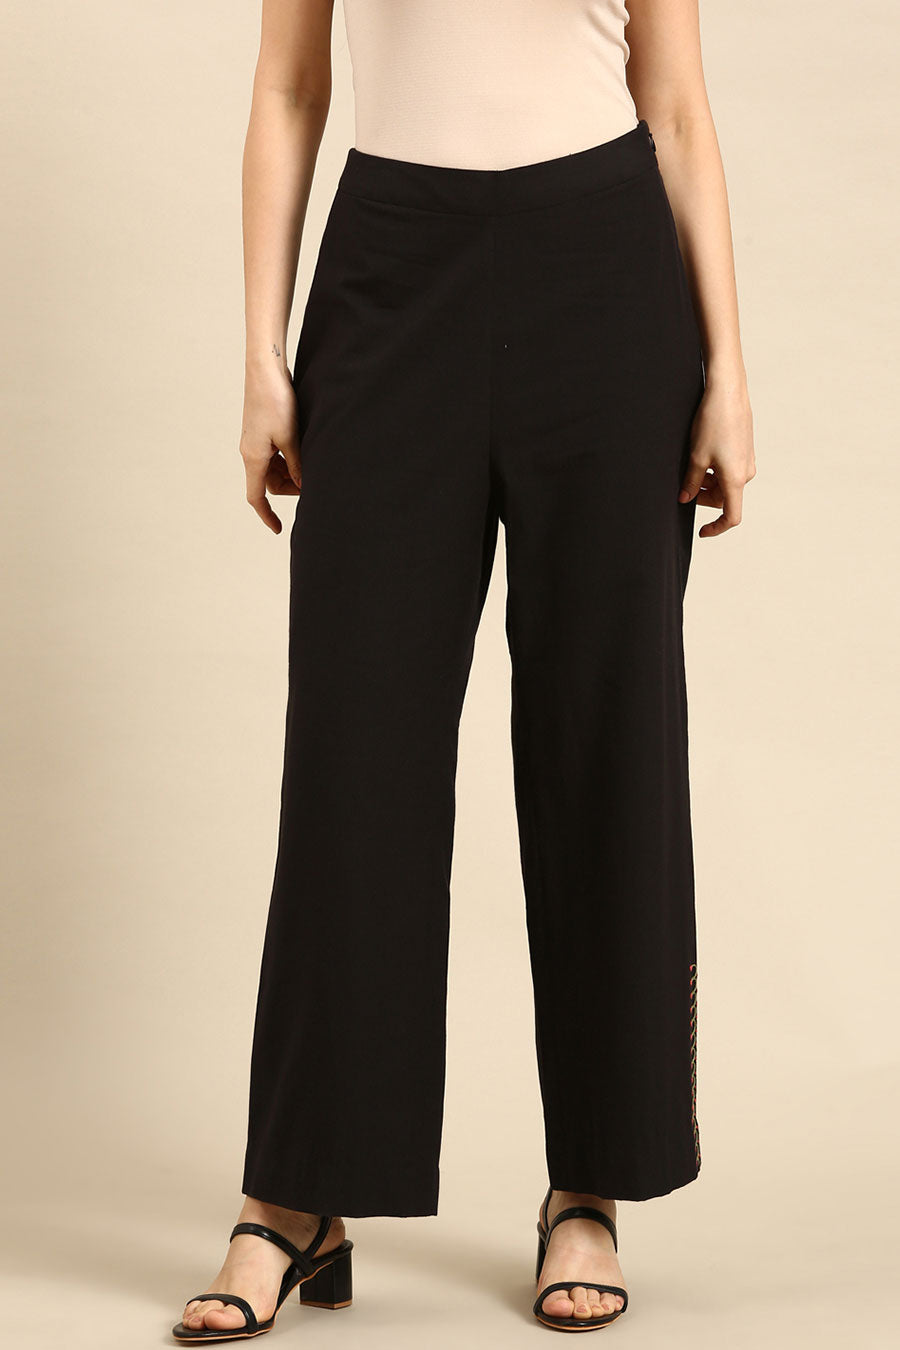 Black Cotton Embroidered Pant